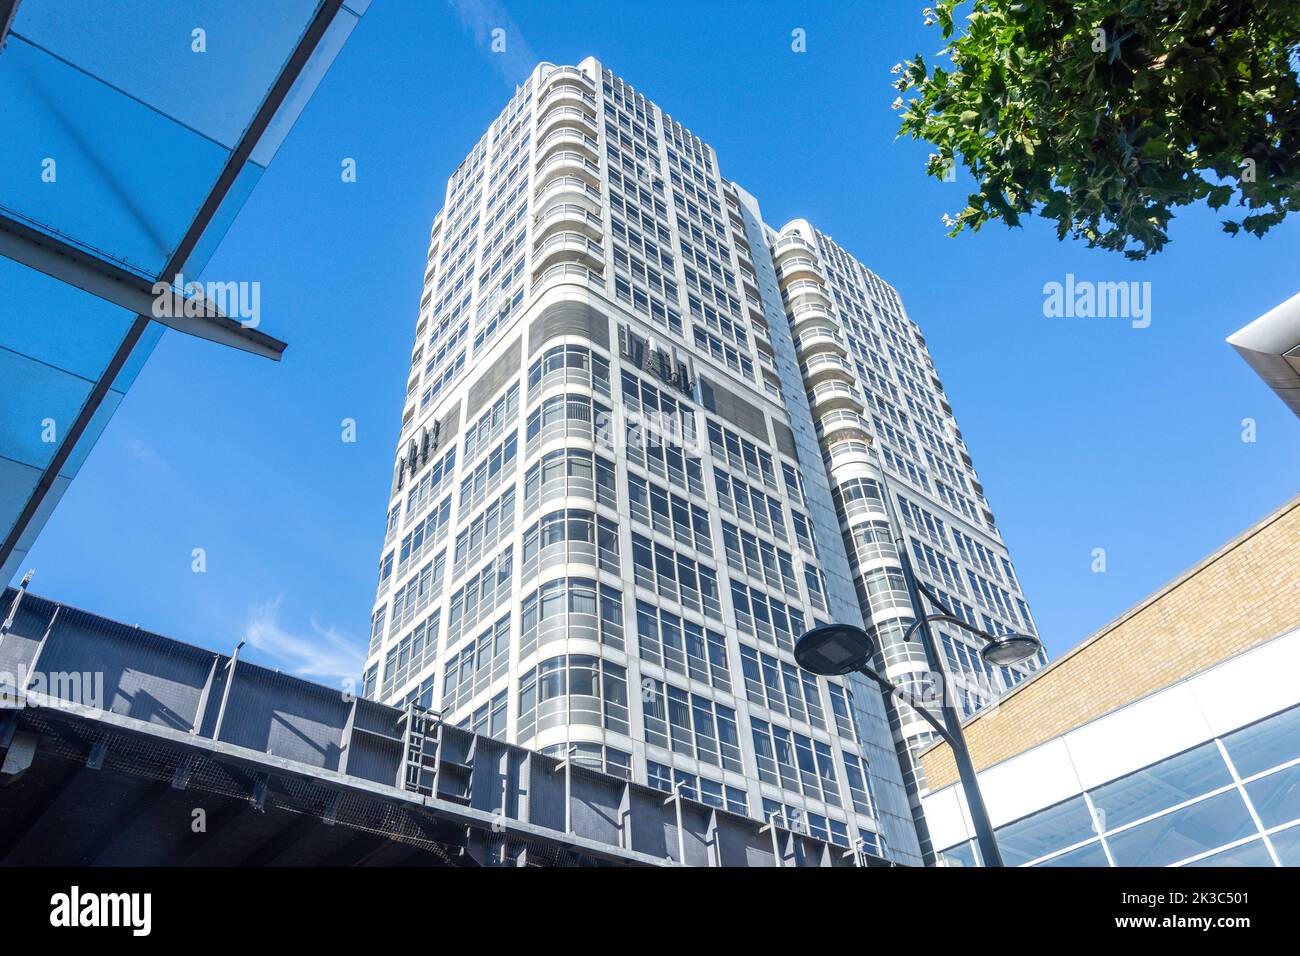 Brunel Tower apartment building from Canal Walk, Swindon, Wiltshire, England, United Kingdom Stock Photo